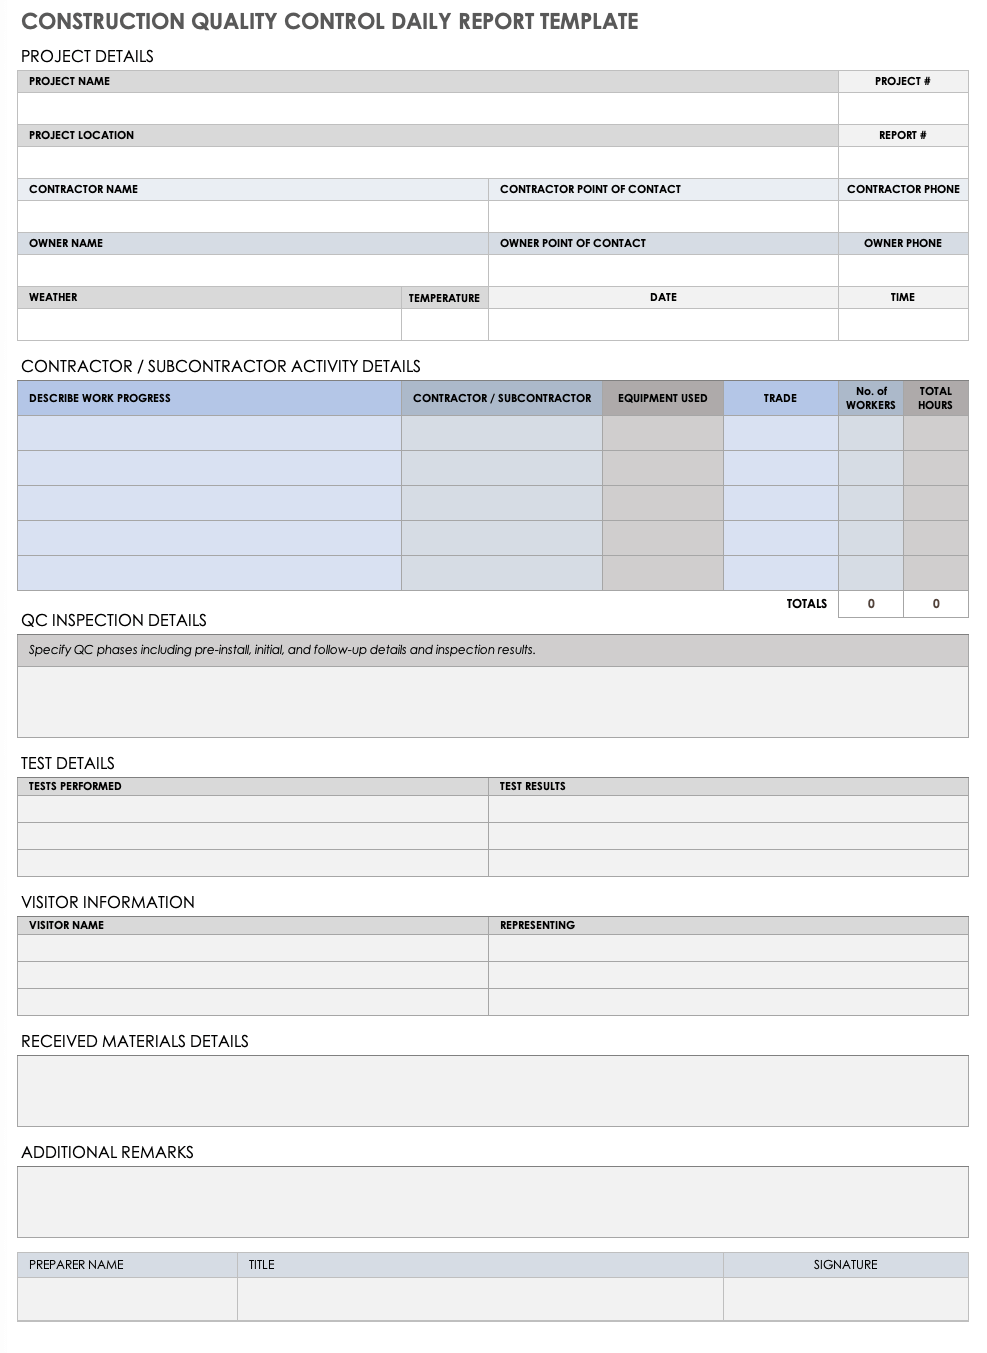 Construction Quality Control Daily Report Template